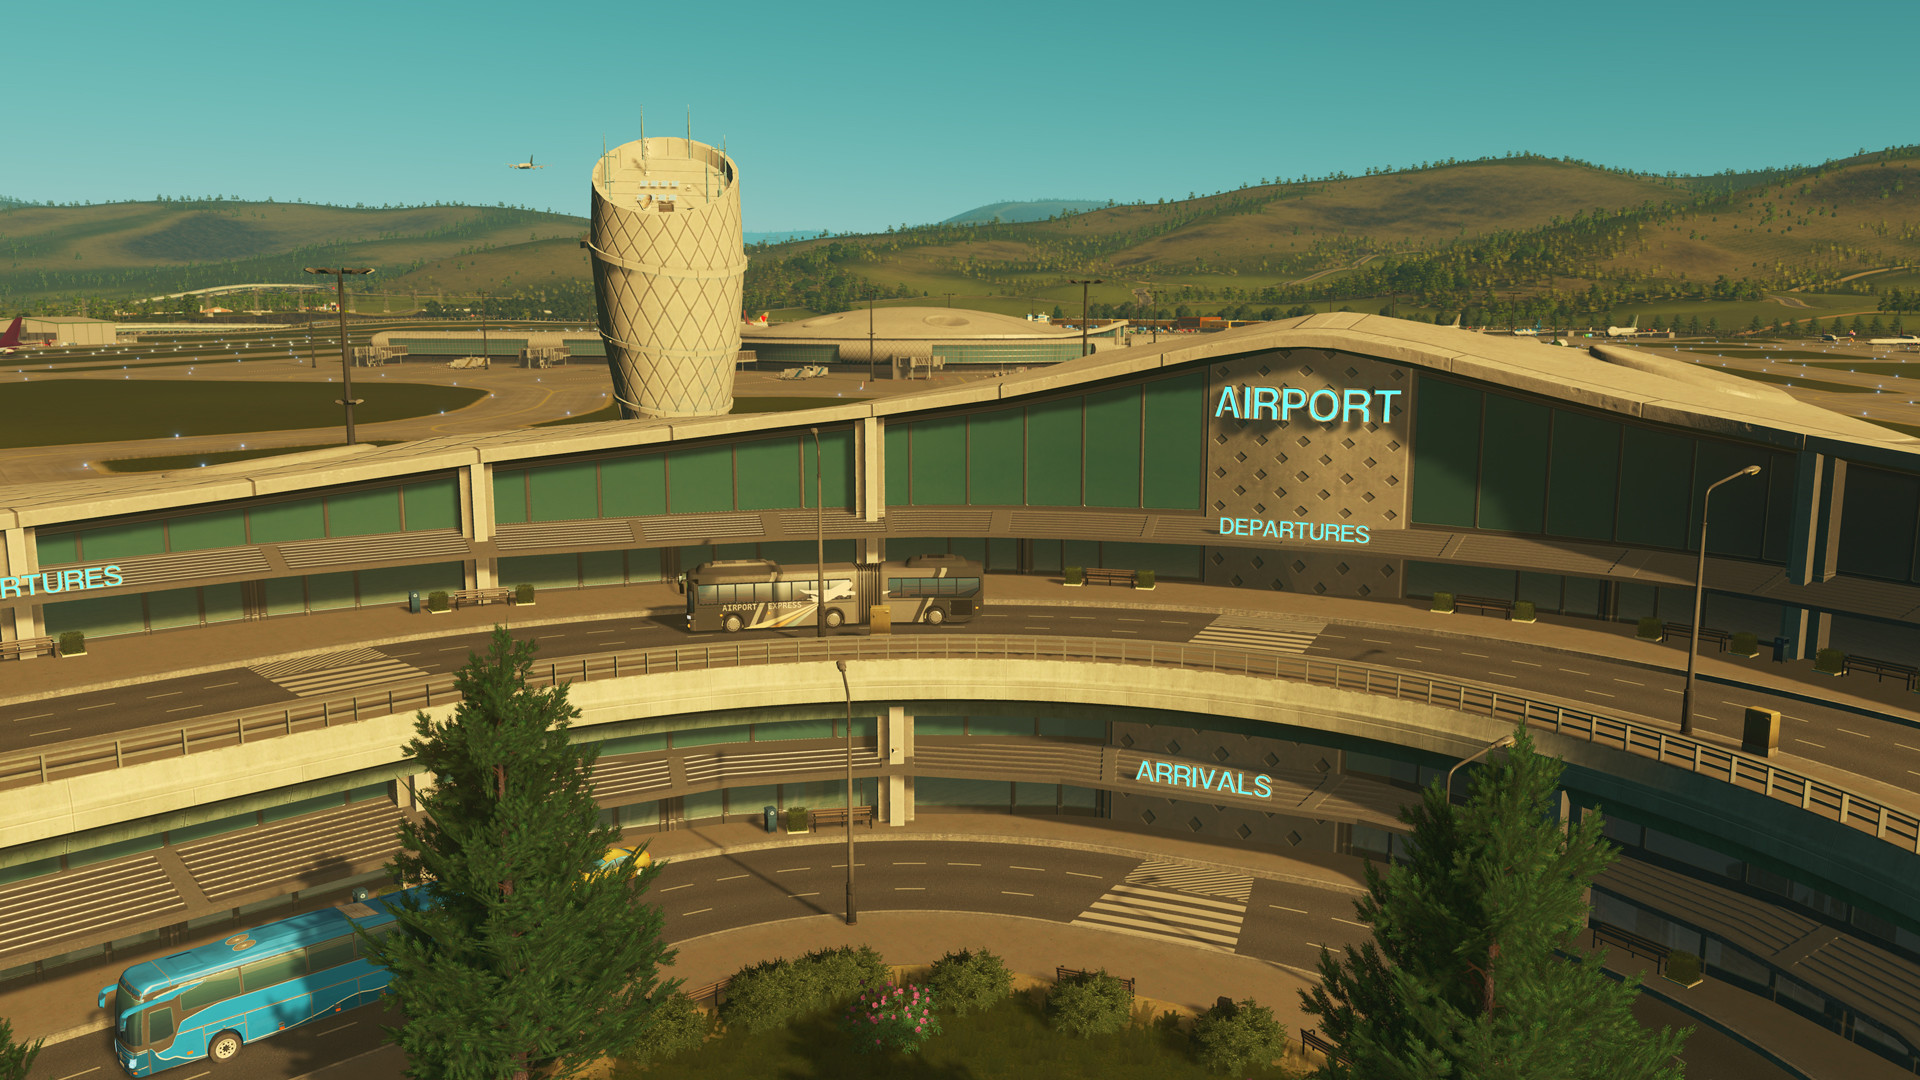 Cities Skylines Airports Screenshot Showing Entrance and Control Tower